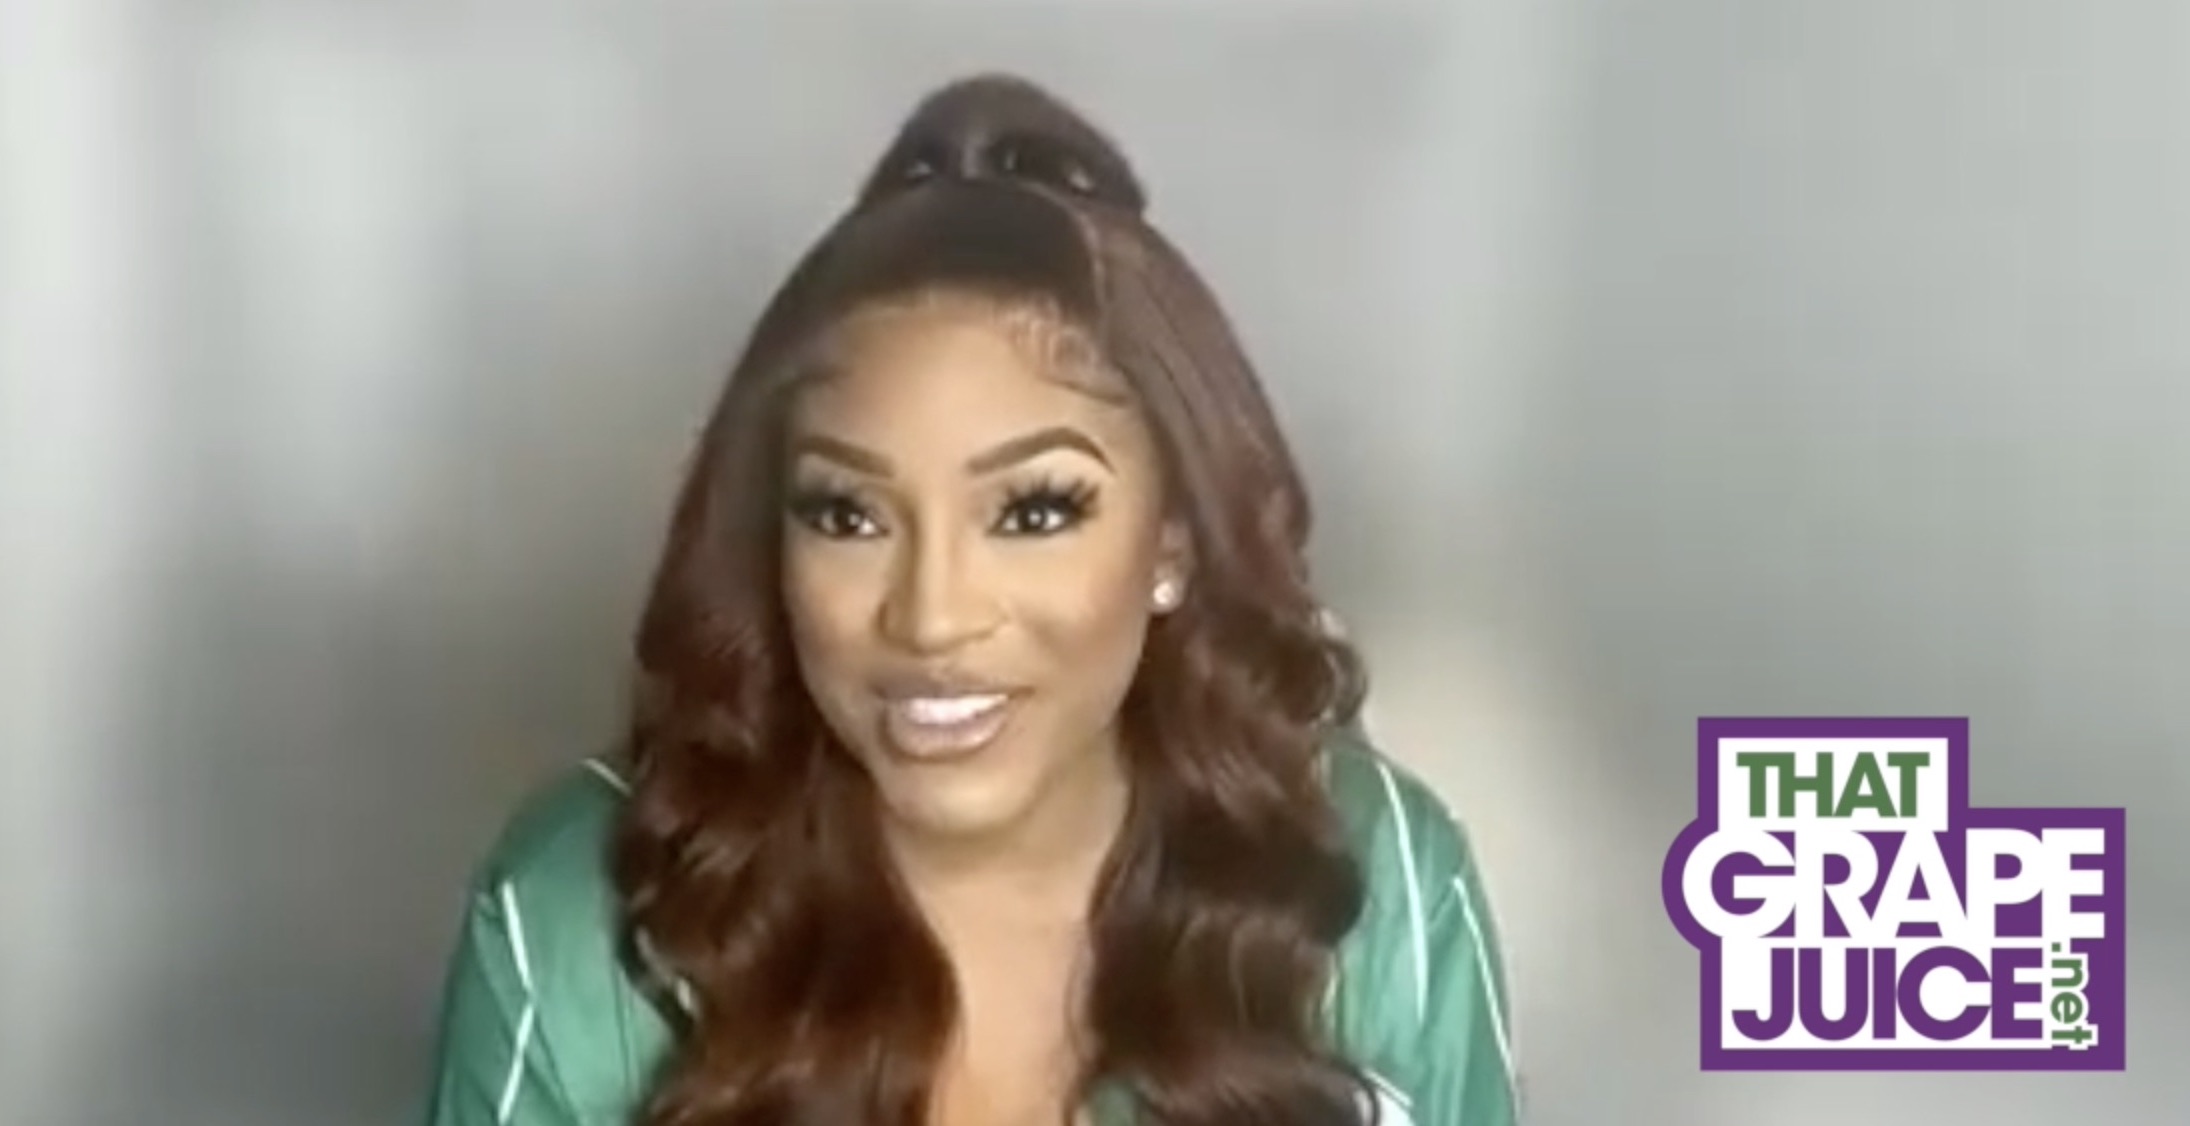 RHOA Exclusive: Drew Sidora Dishes on New Music, Reunion, Divorce, & Future on Show